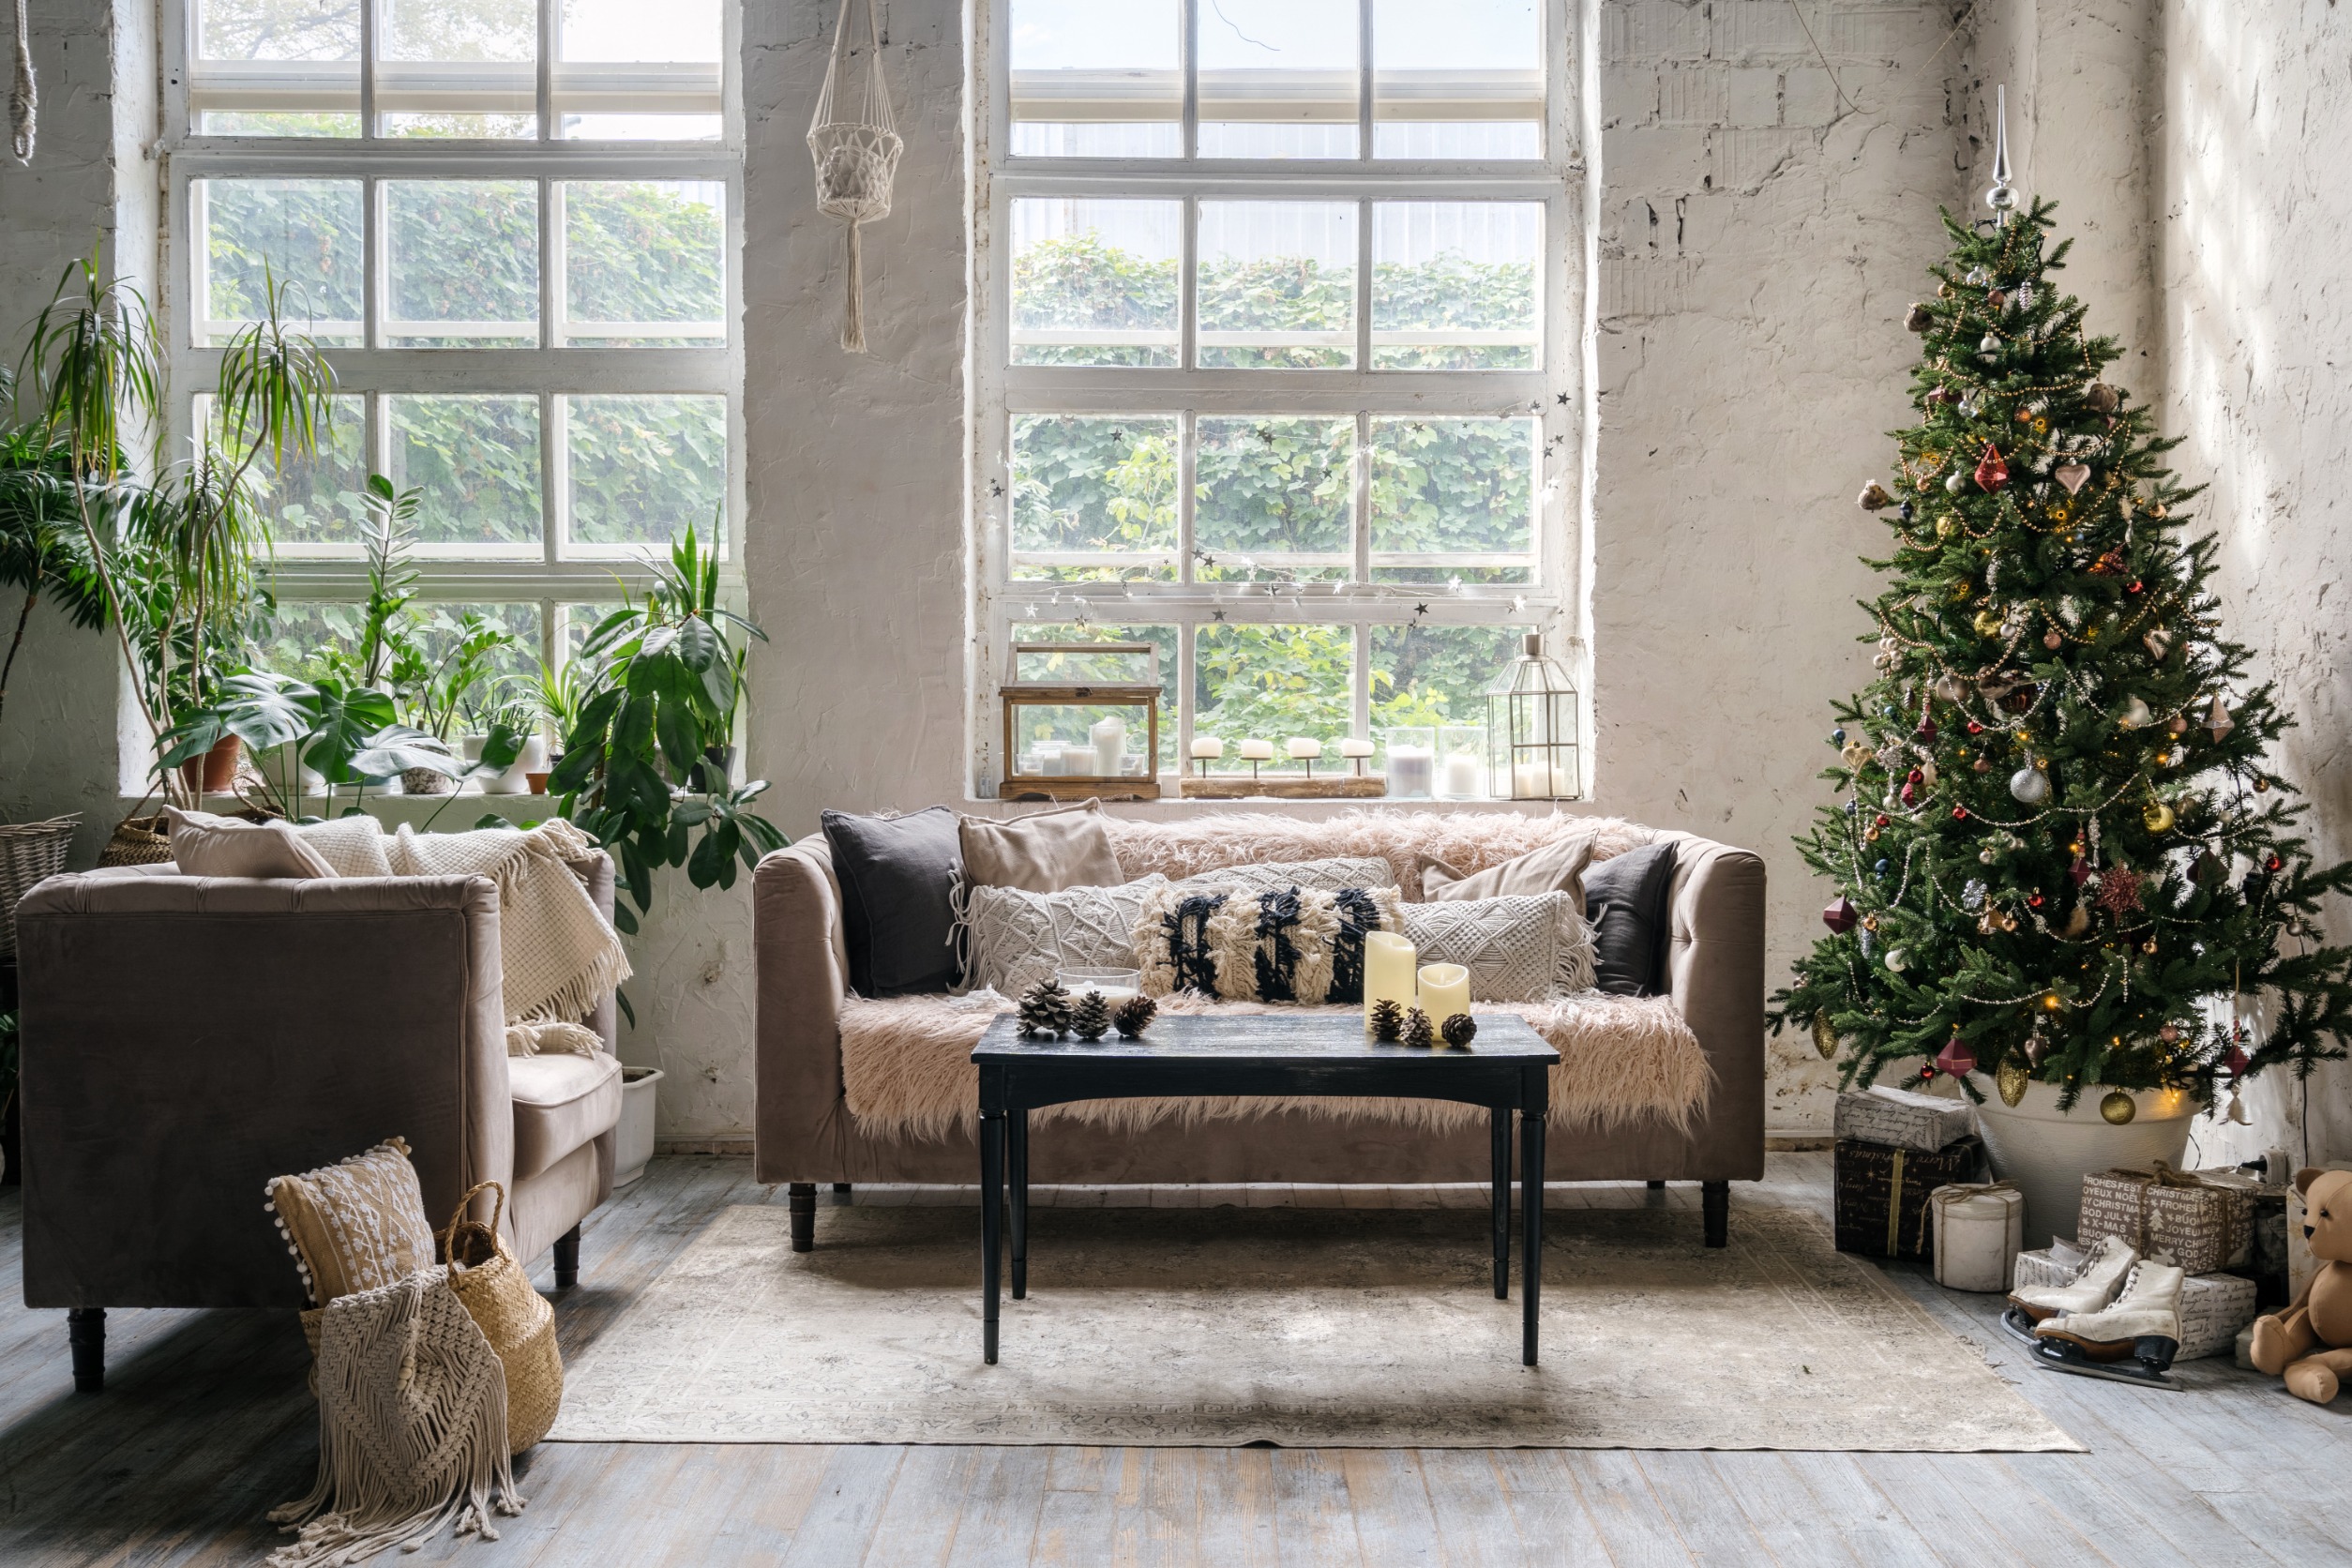 A cozy living room with houseplants during Christmas.